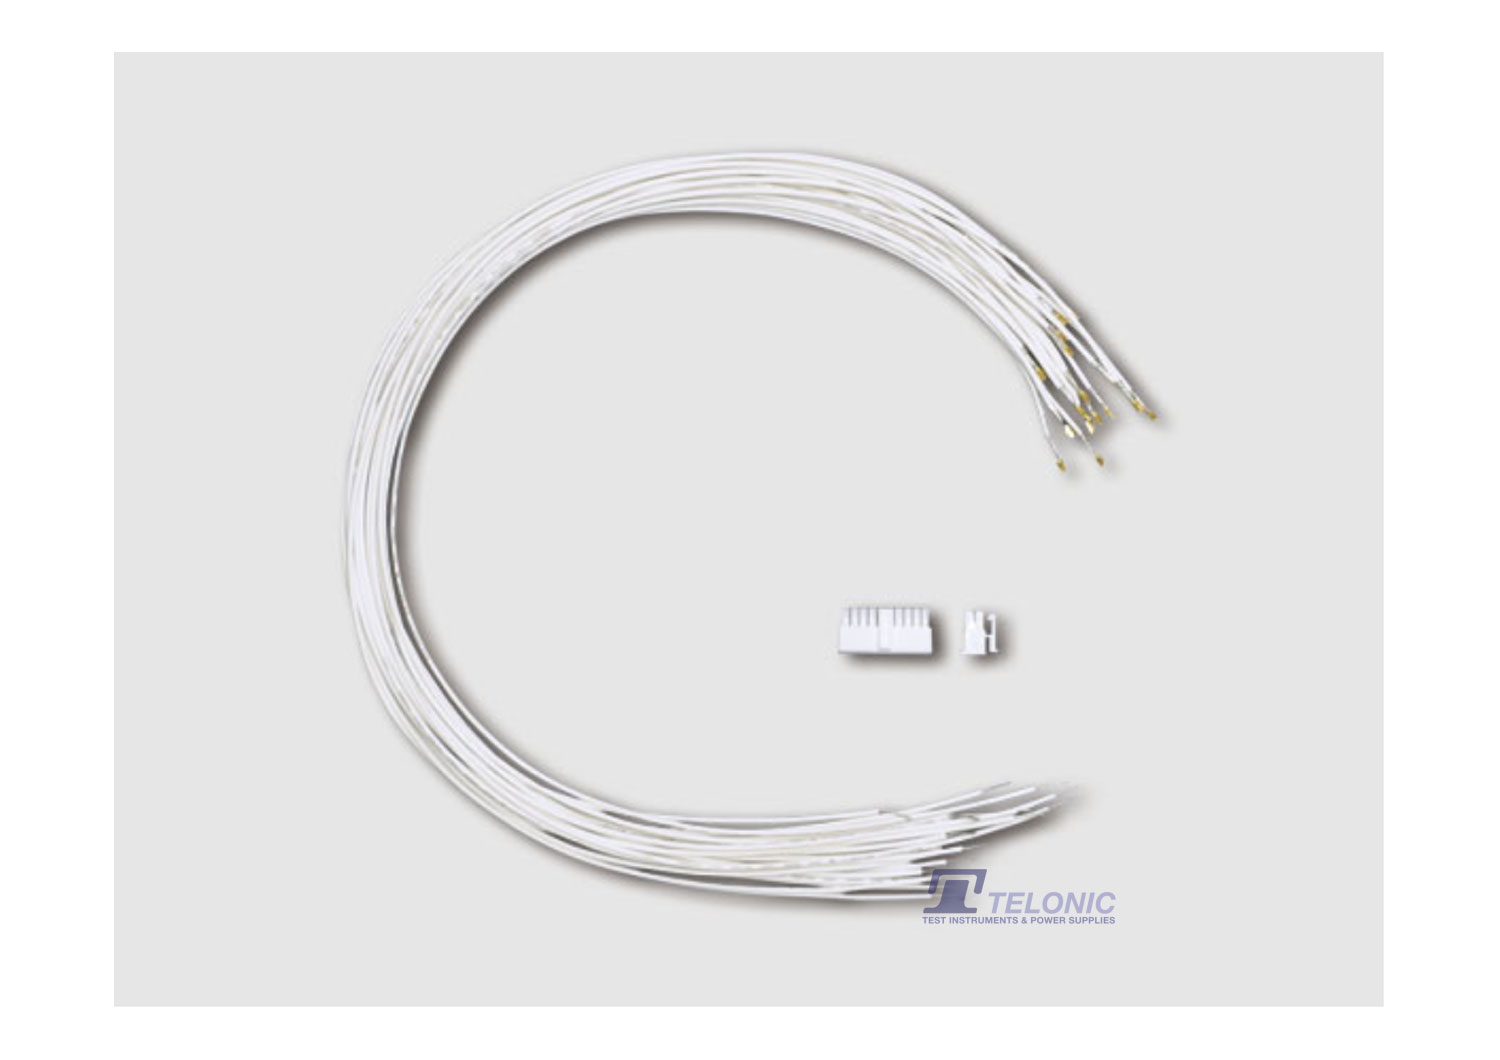 Kikusui OP03-PWR-01 External Control Cable and Connector Set